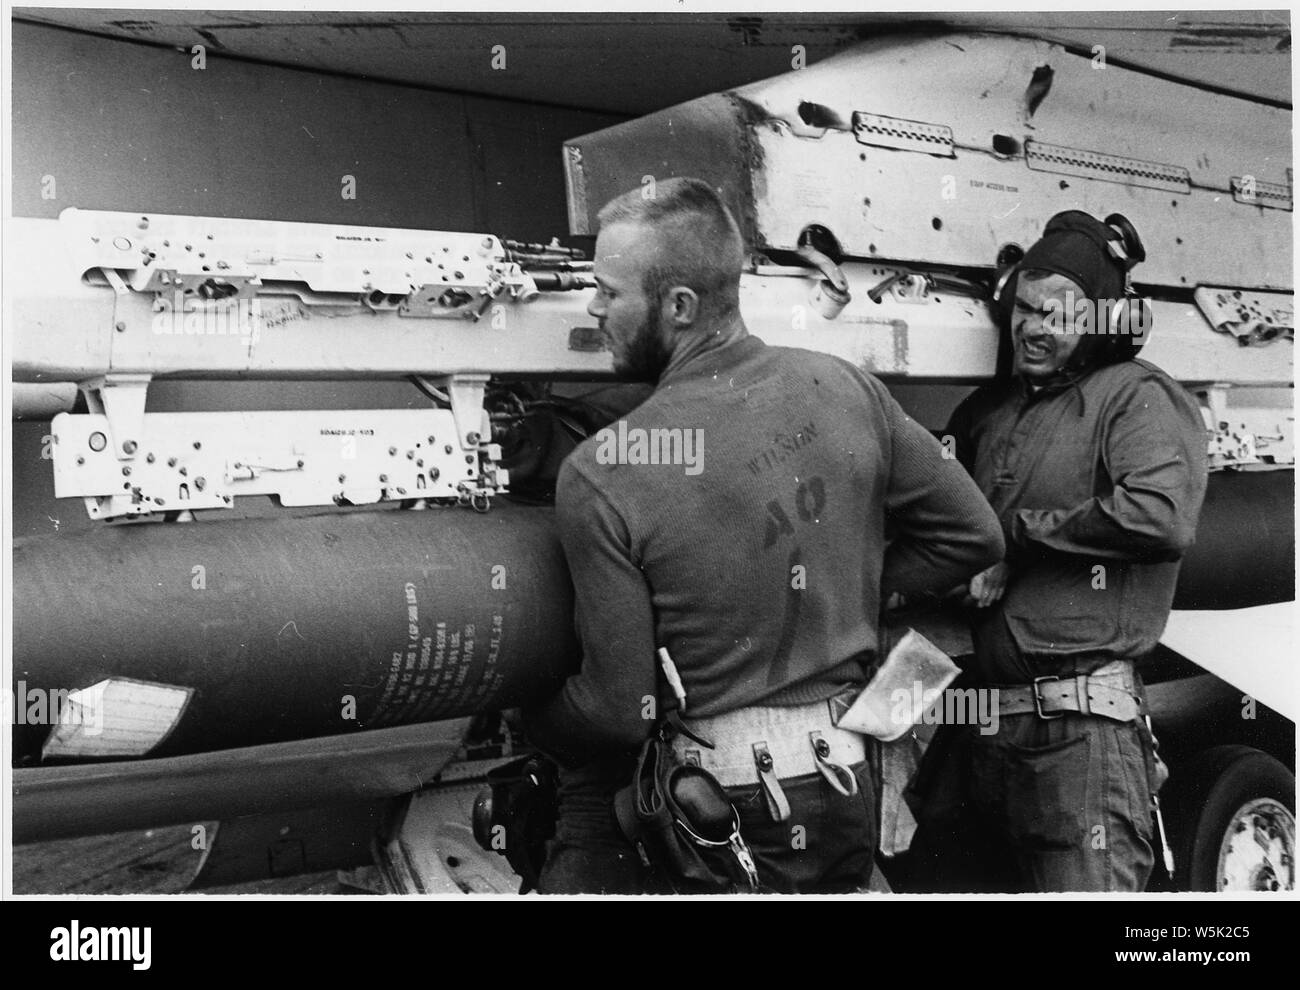 Aviation Ordnanceman Second Class R. P. Wilson of Hinton, West Virginia, (left), and Aviation Ordnanceman Third Class D. A. Bibbee of Portland, Oregon, place a bomb on the rack of an F8 Crusader aboard the attack aircraft carrier USS Ticonderoga (CVA 14). During recent months, the fighter aircraft have been doubling as attack aircraft. Squadron 194 pilots have dropped over 135,000 pounds on enemy targets. Stock Photo